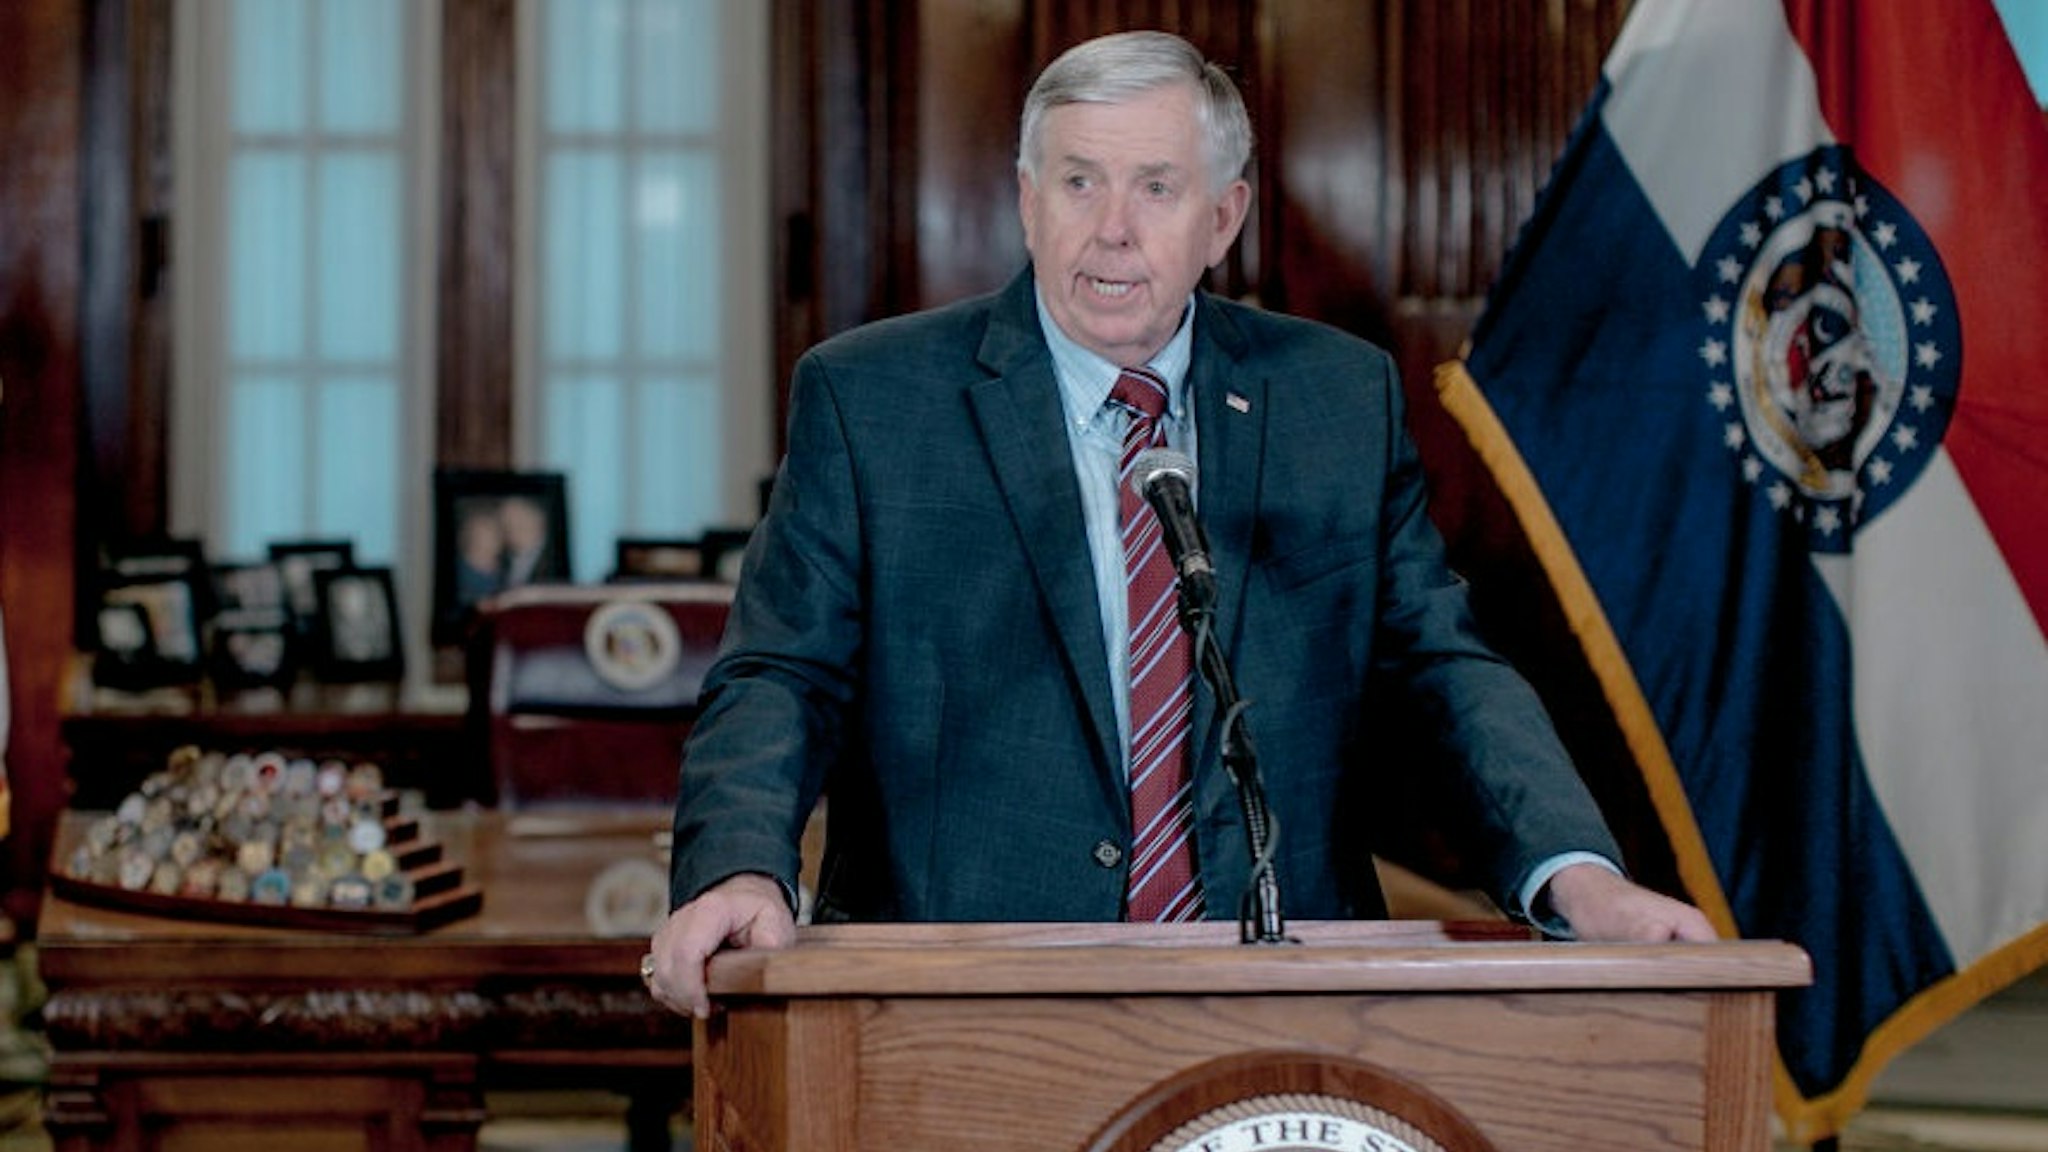 JEFFERSON CITY, MO - MAY 29: Gov. Mike Parson speaks during a press conference to discuss the status of license renewal for the St. Louis Planned Parenthood facility on May 29, 2019 in Jefferson City, Missouri. Parson stated that the facility still had until Friday to comply with the state in order to renew the license. (Photo by Jacob Moscovitch/Getty Images)